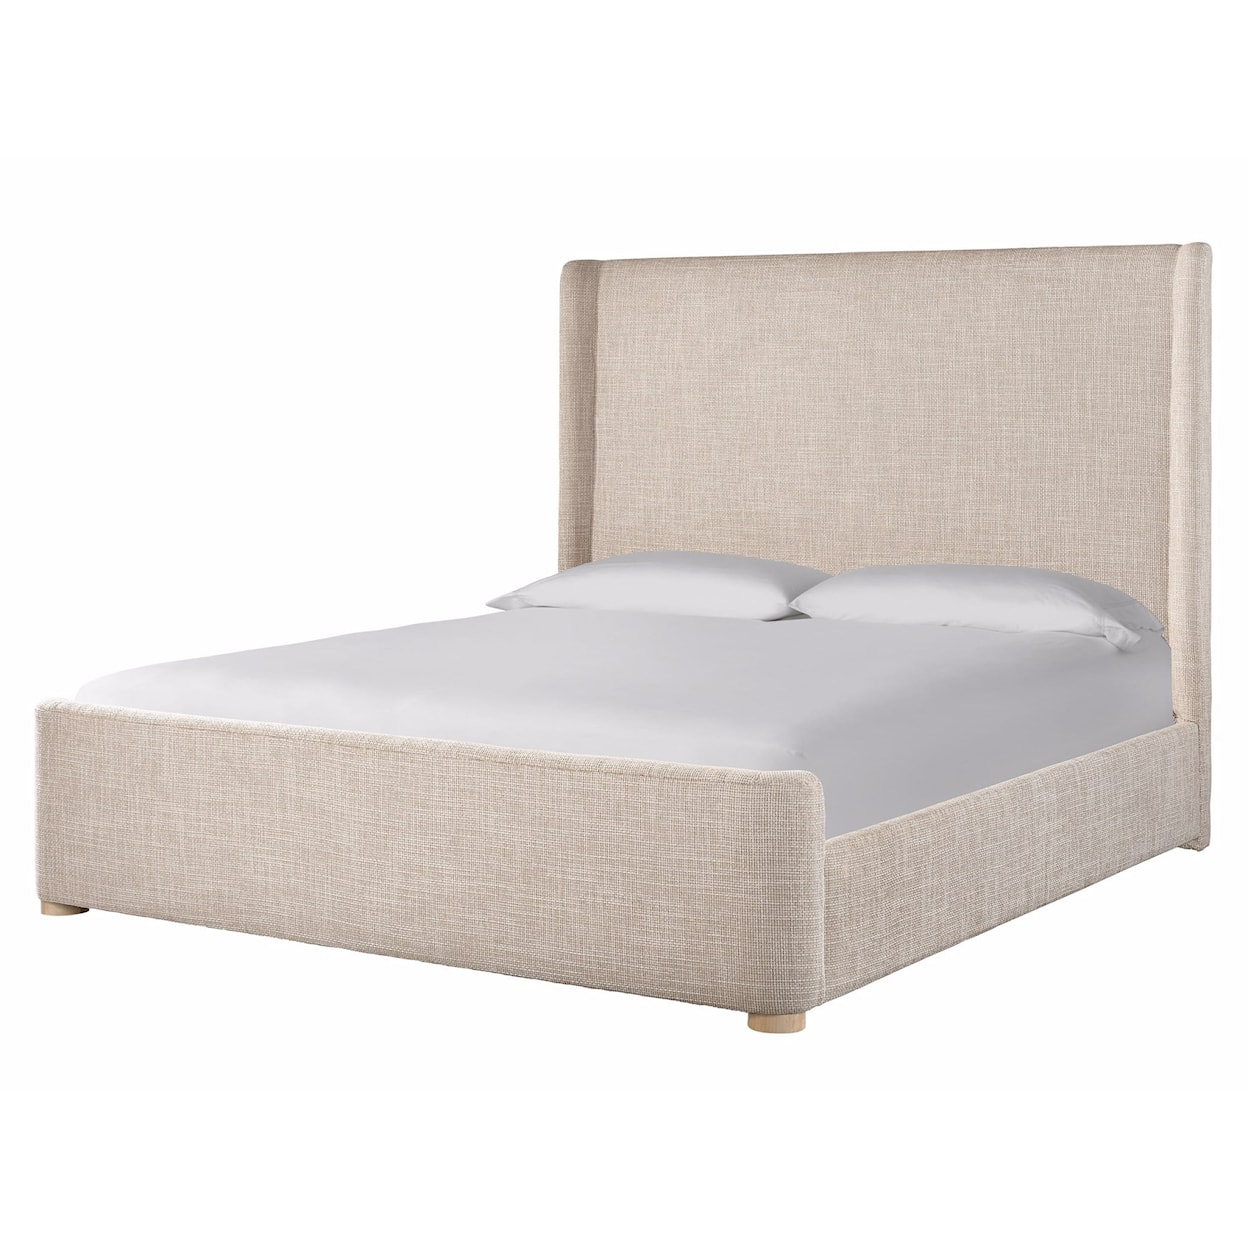 Universal Nomad King High Panel Bed